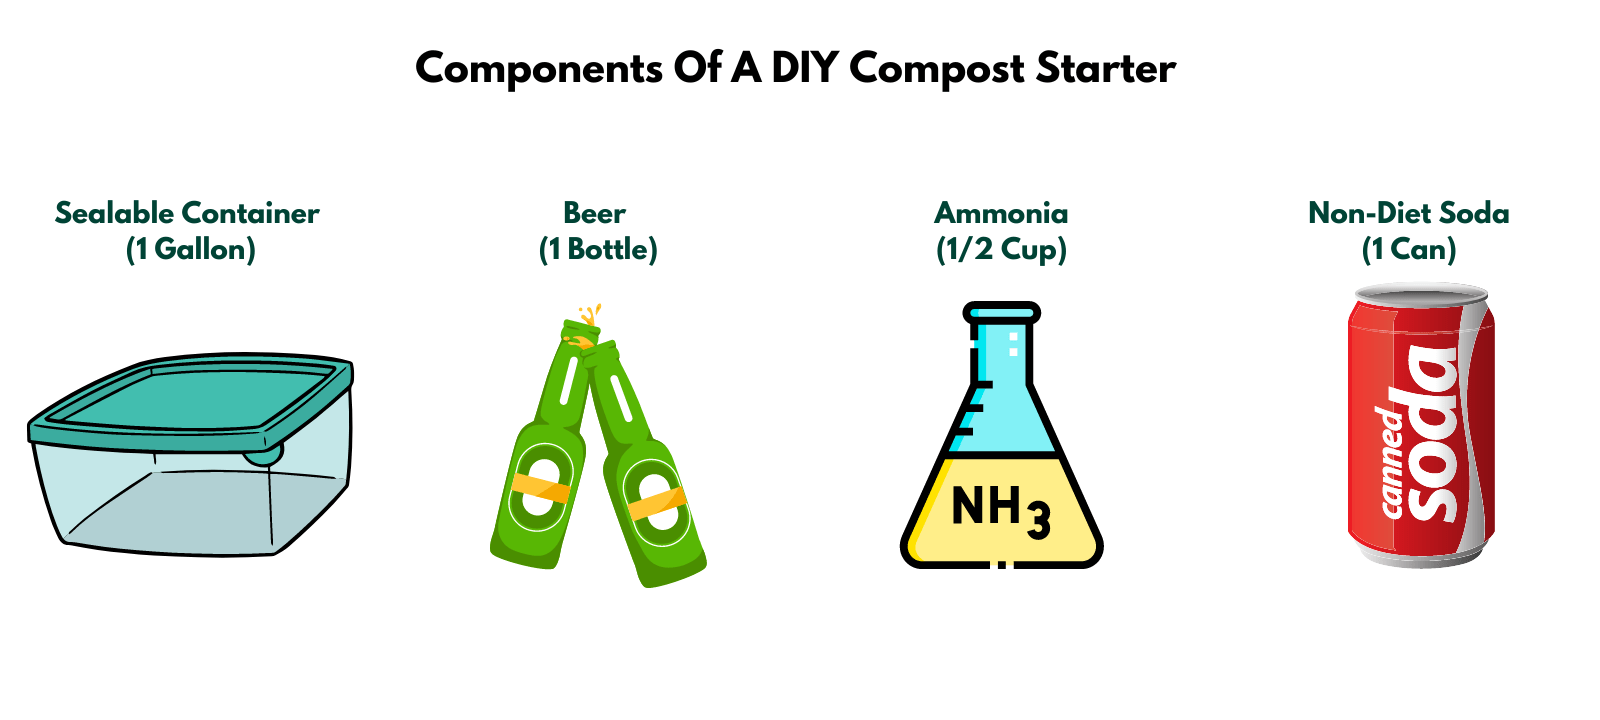 Components Of A DIY Compost Starter